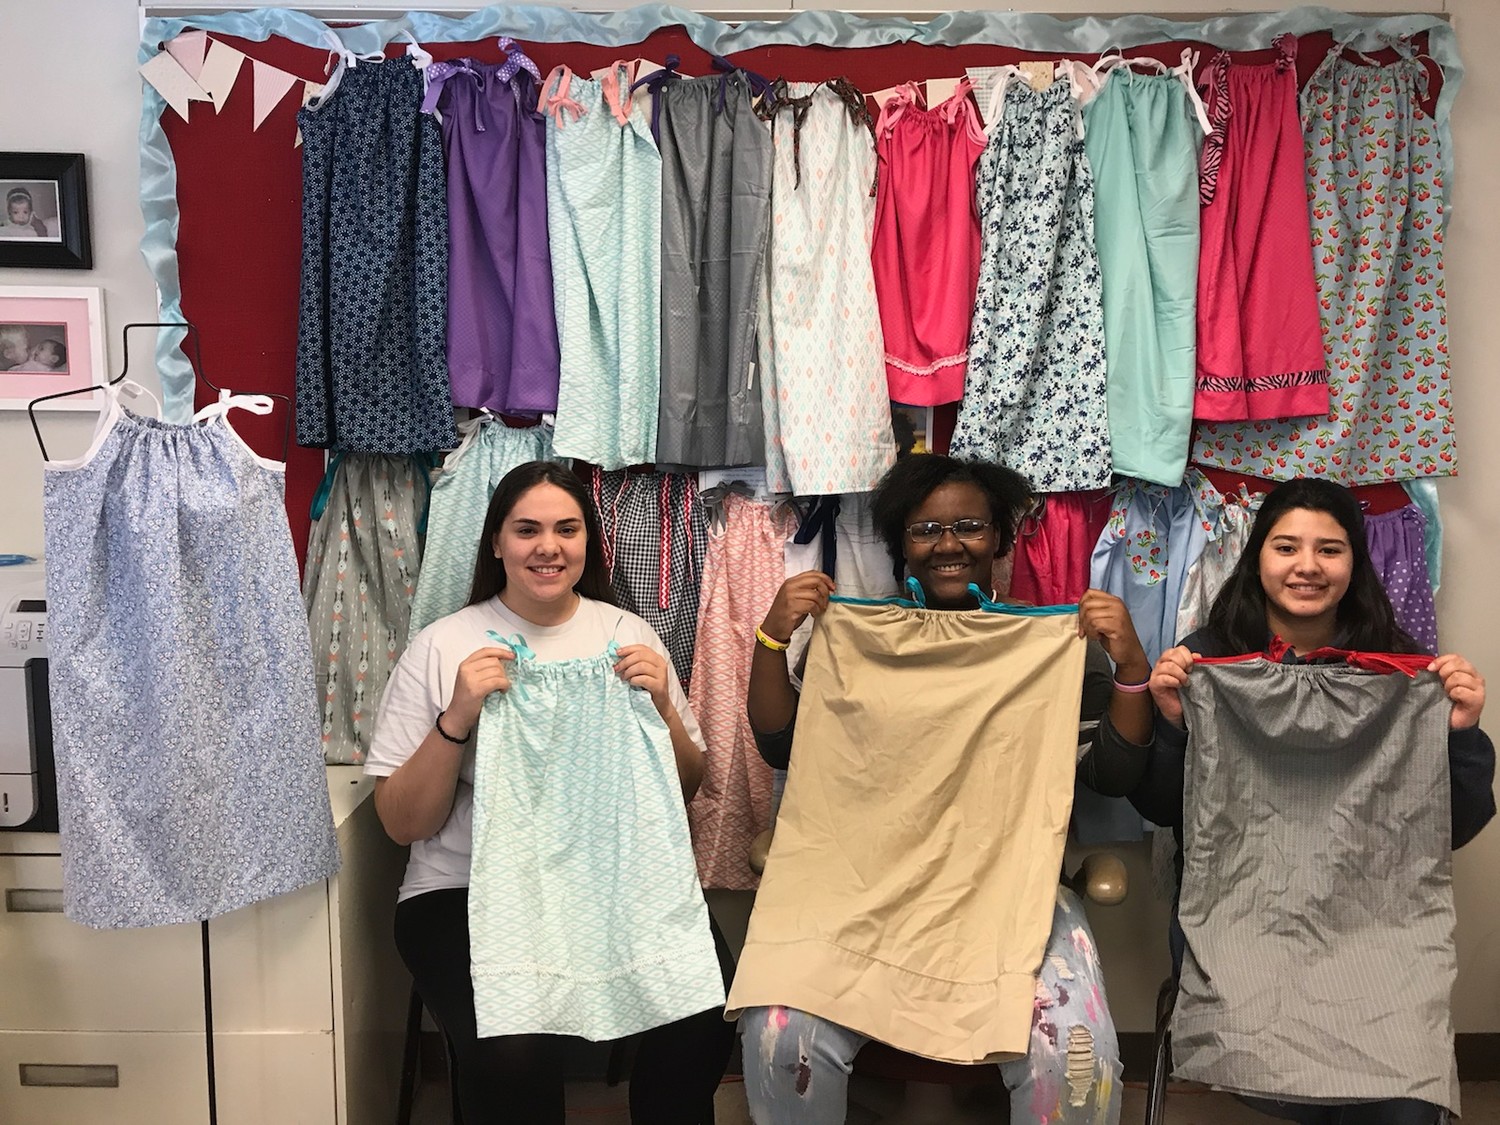 The Gonzales FCCLA completed a project where they sewed 140 pillowcase dresses to send to African schoolgirls.